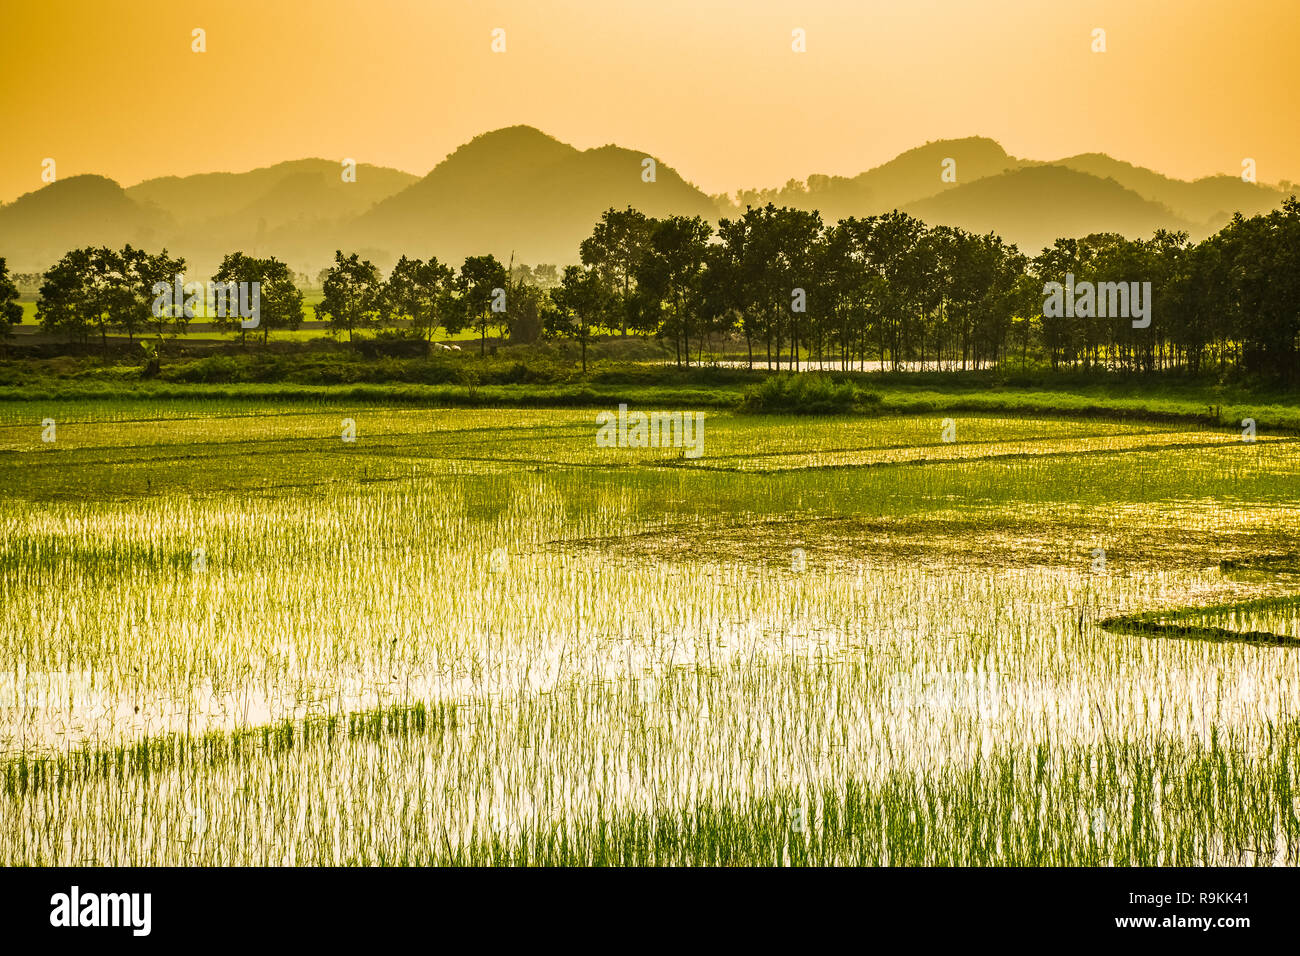 Rice field, Trang An in Ninh Binh in Vietnam landscapes Stock Photo